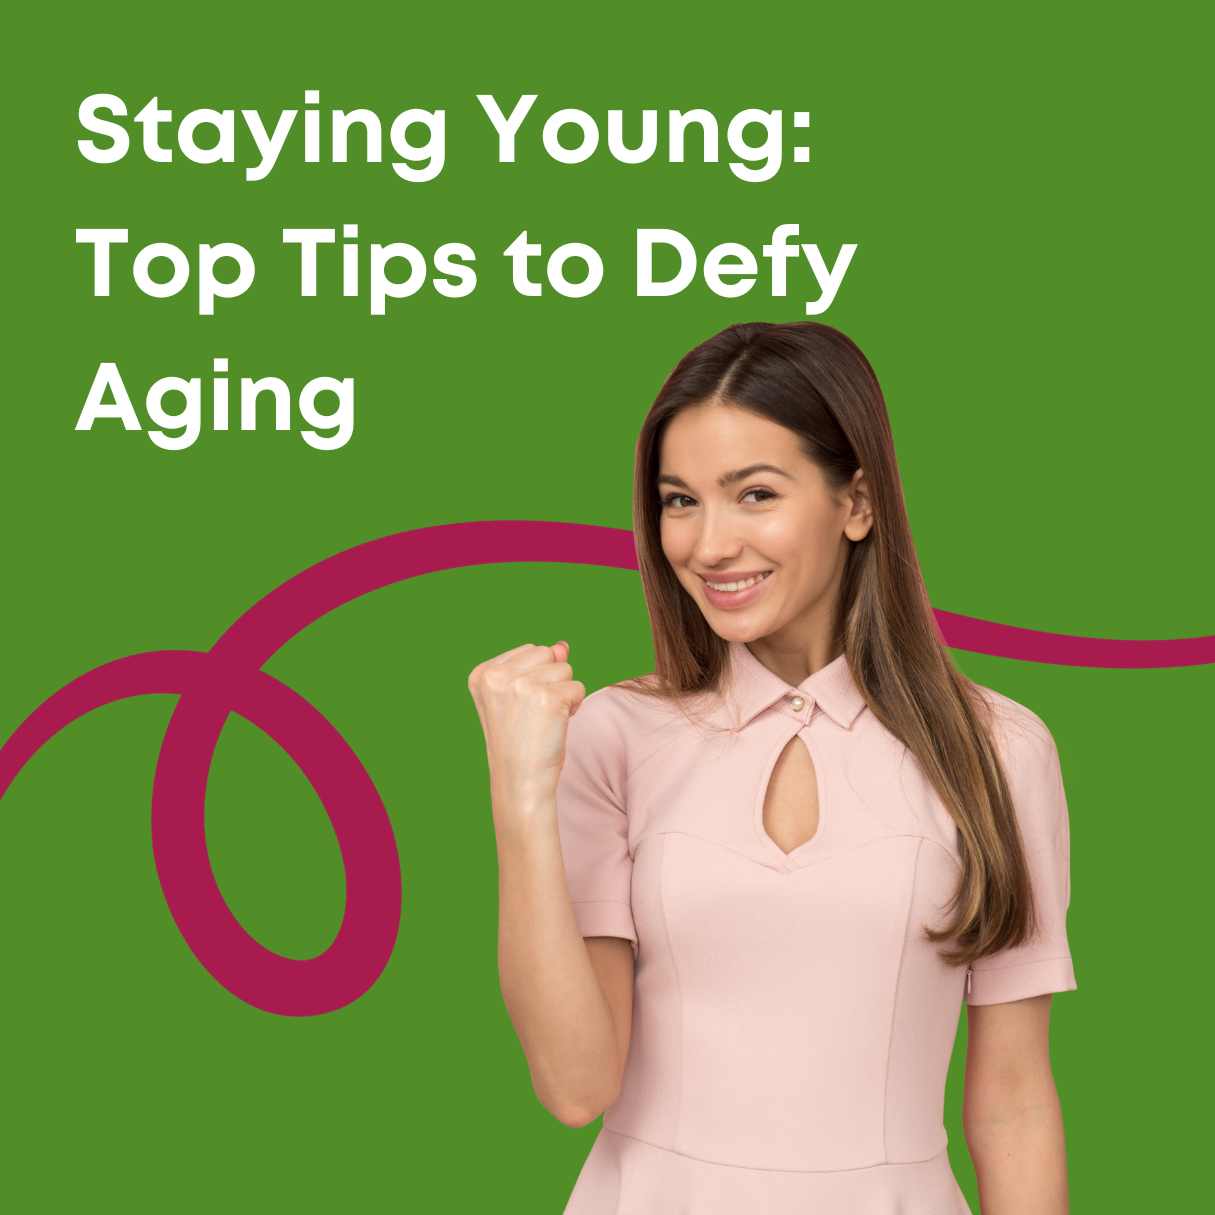 Staying Young Top Tips to Defy Aging